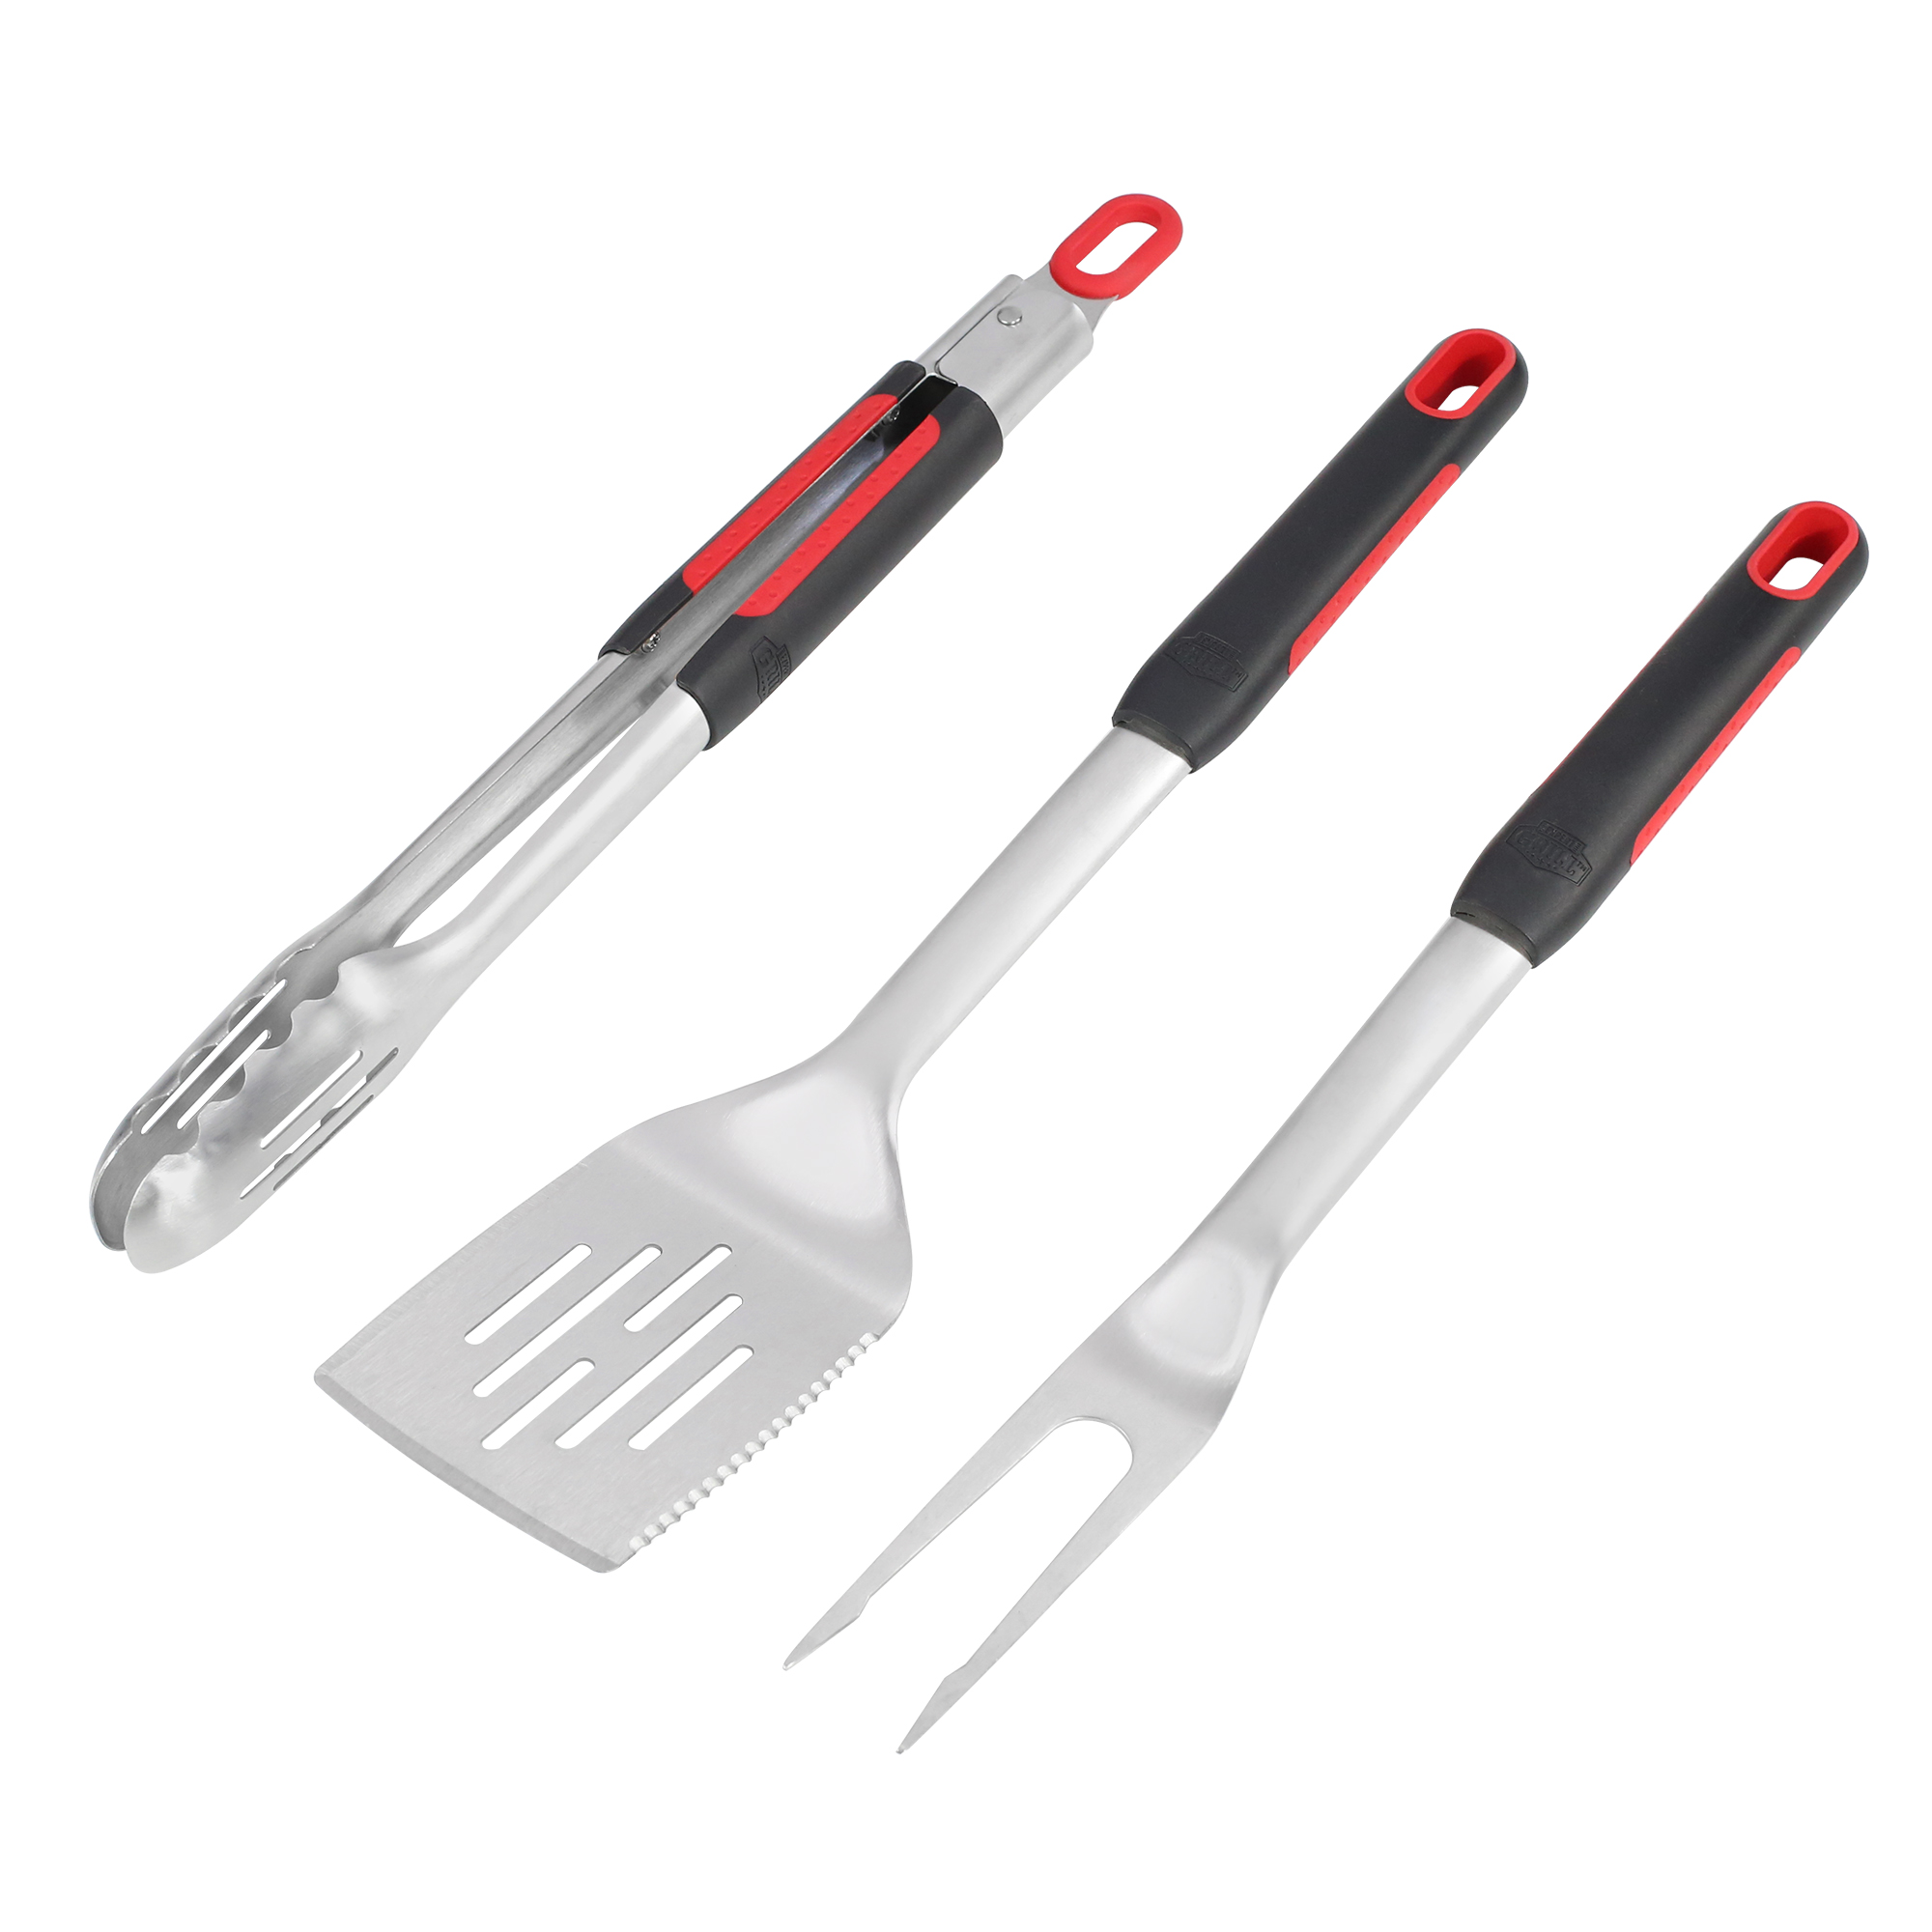 Expert Grill Stainless Steel 3-Piece BBQ Tool Set with Soft Grip Handles - image 1 of 9